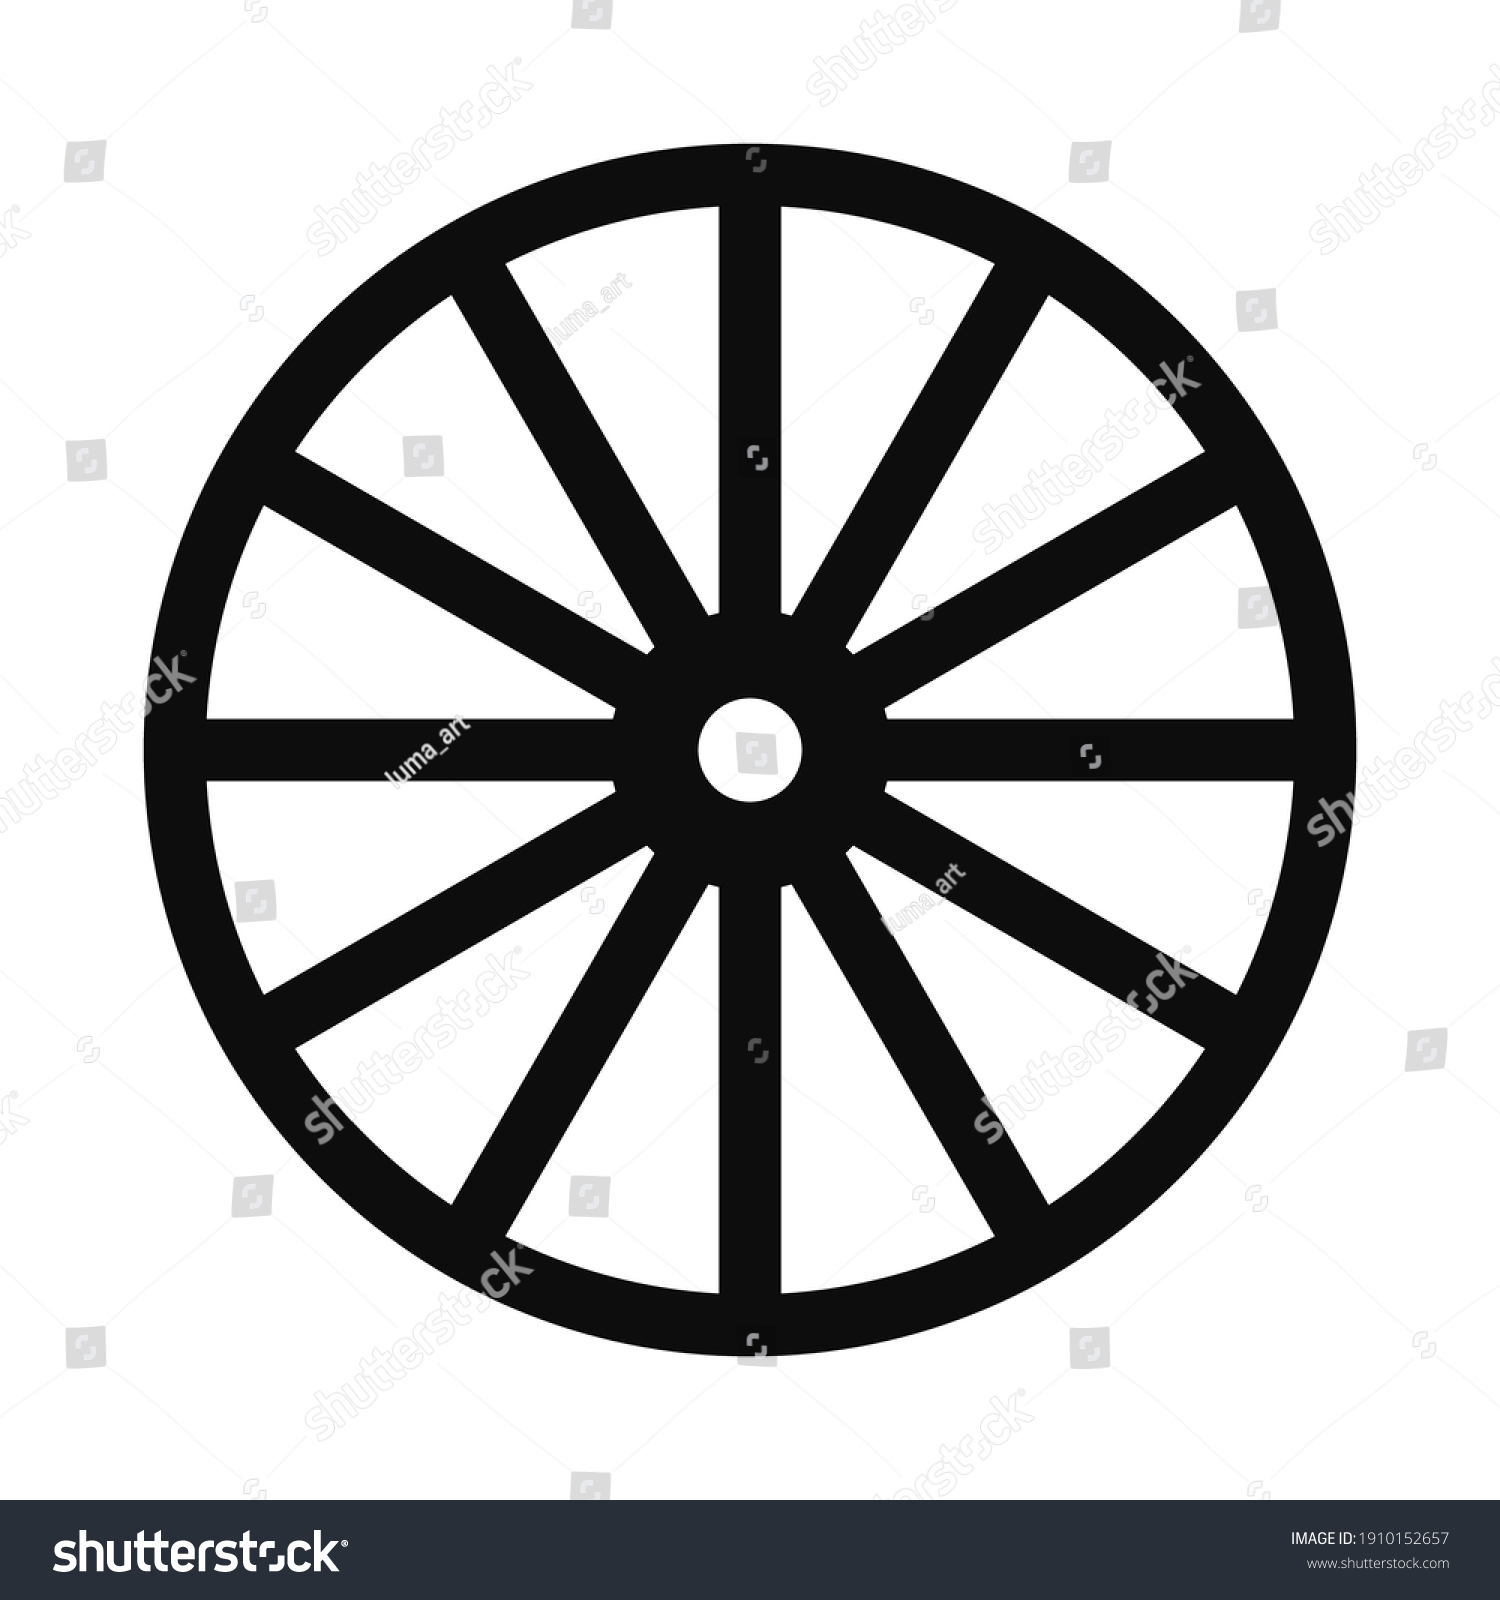 SVG of Vector flat illustration of far west style wagon wooden wheel icon - Black symbol isolated on white background svg